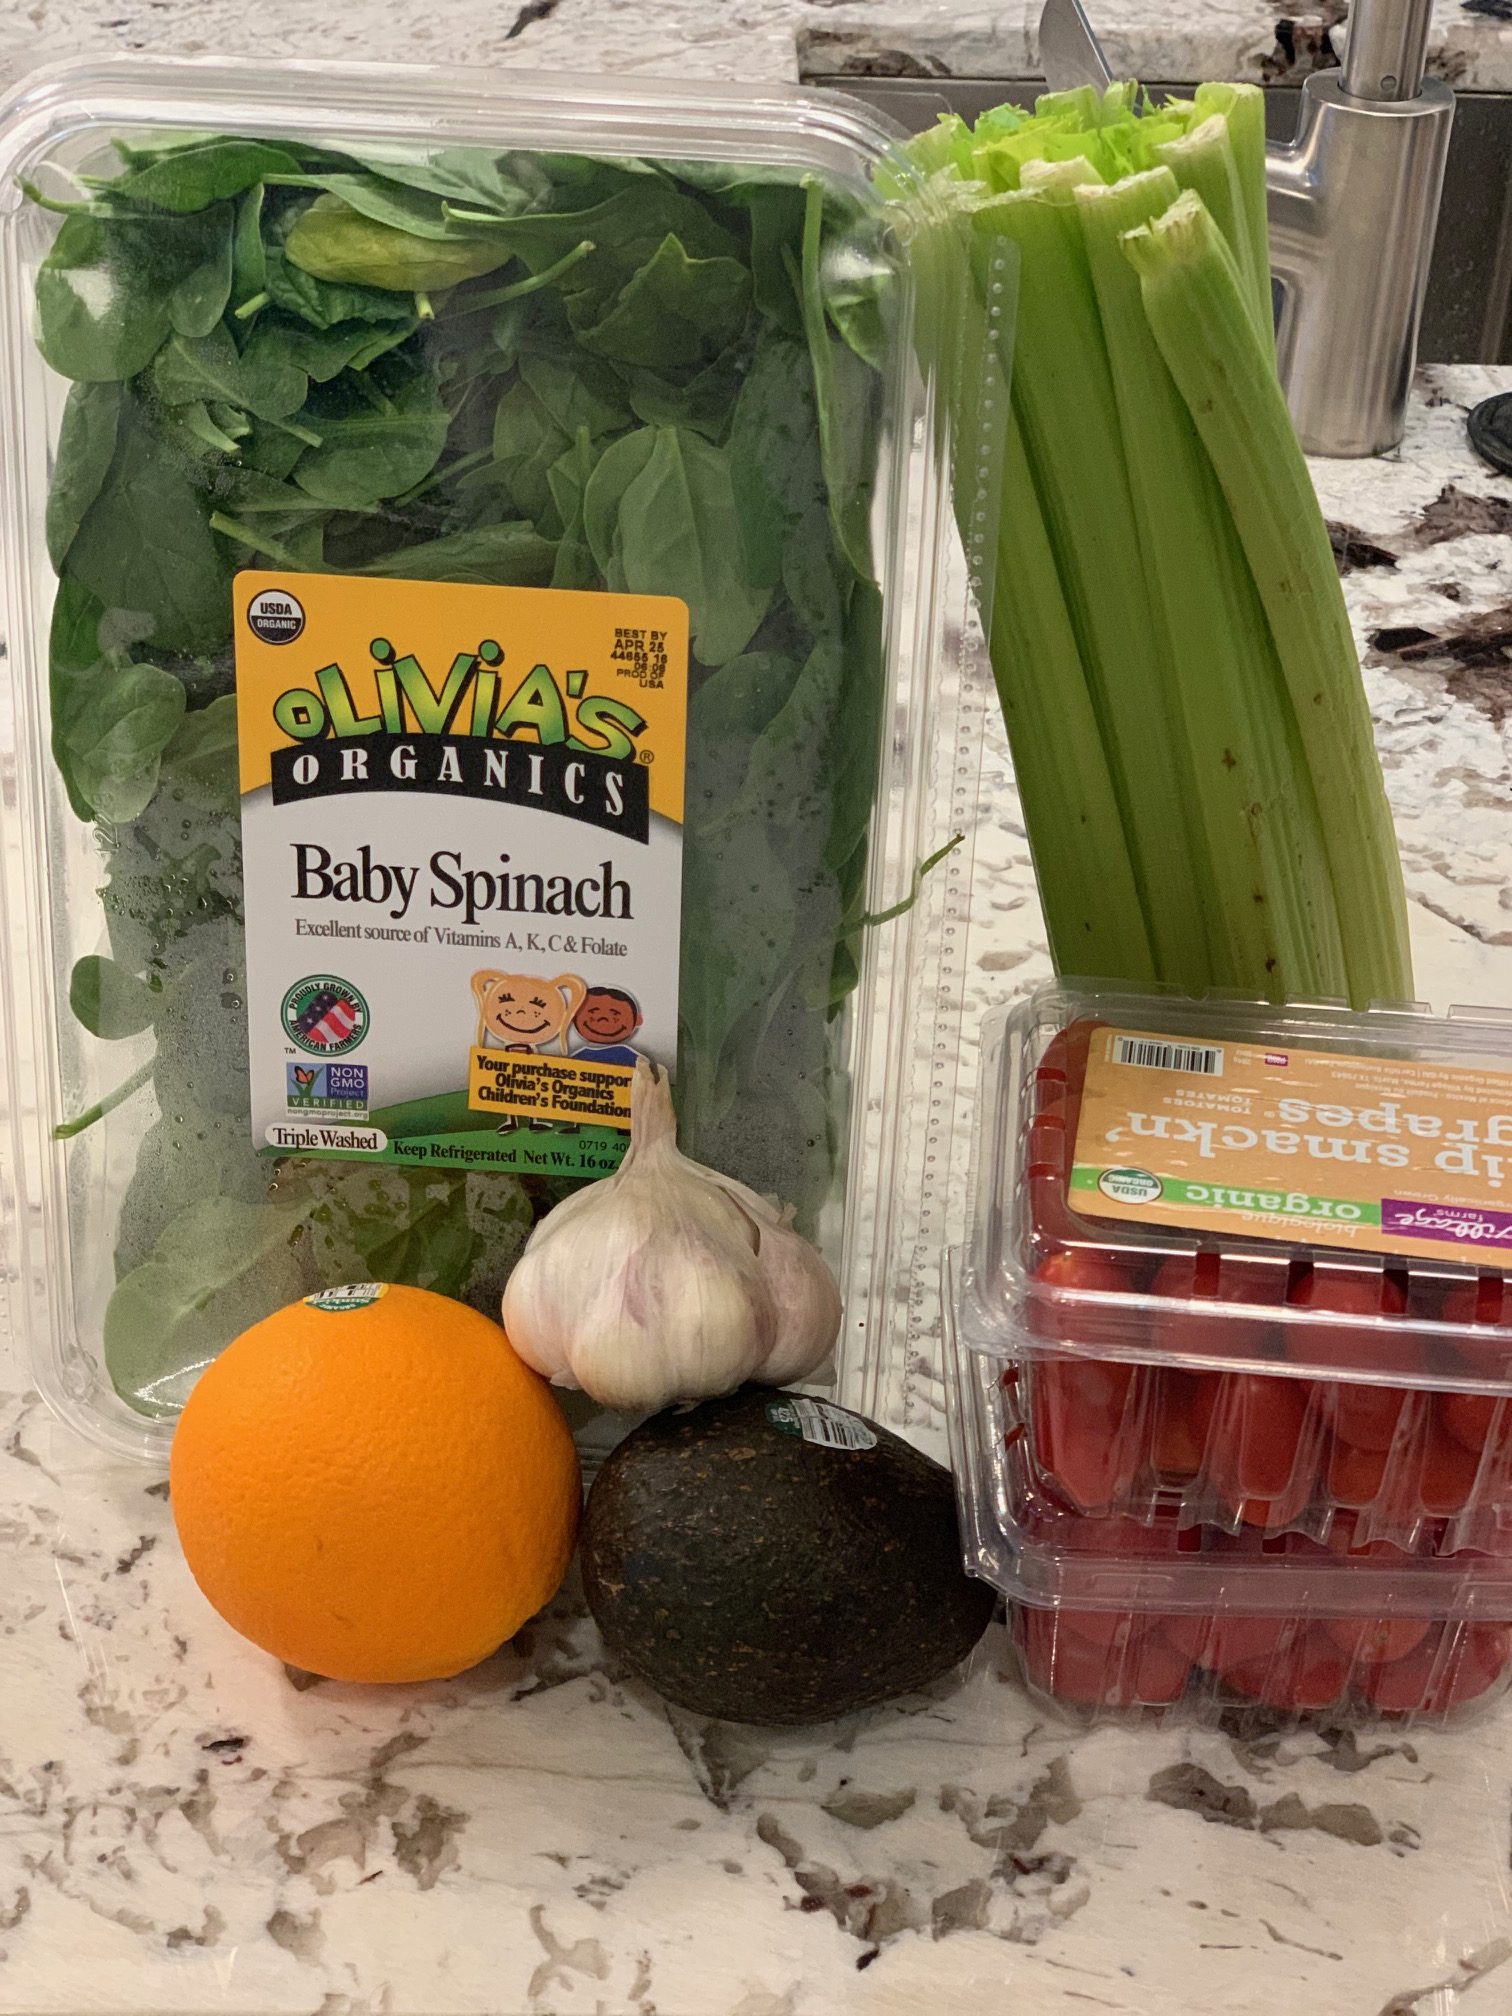 Ingredients for spinach soup